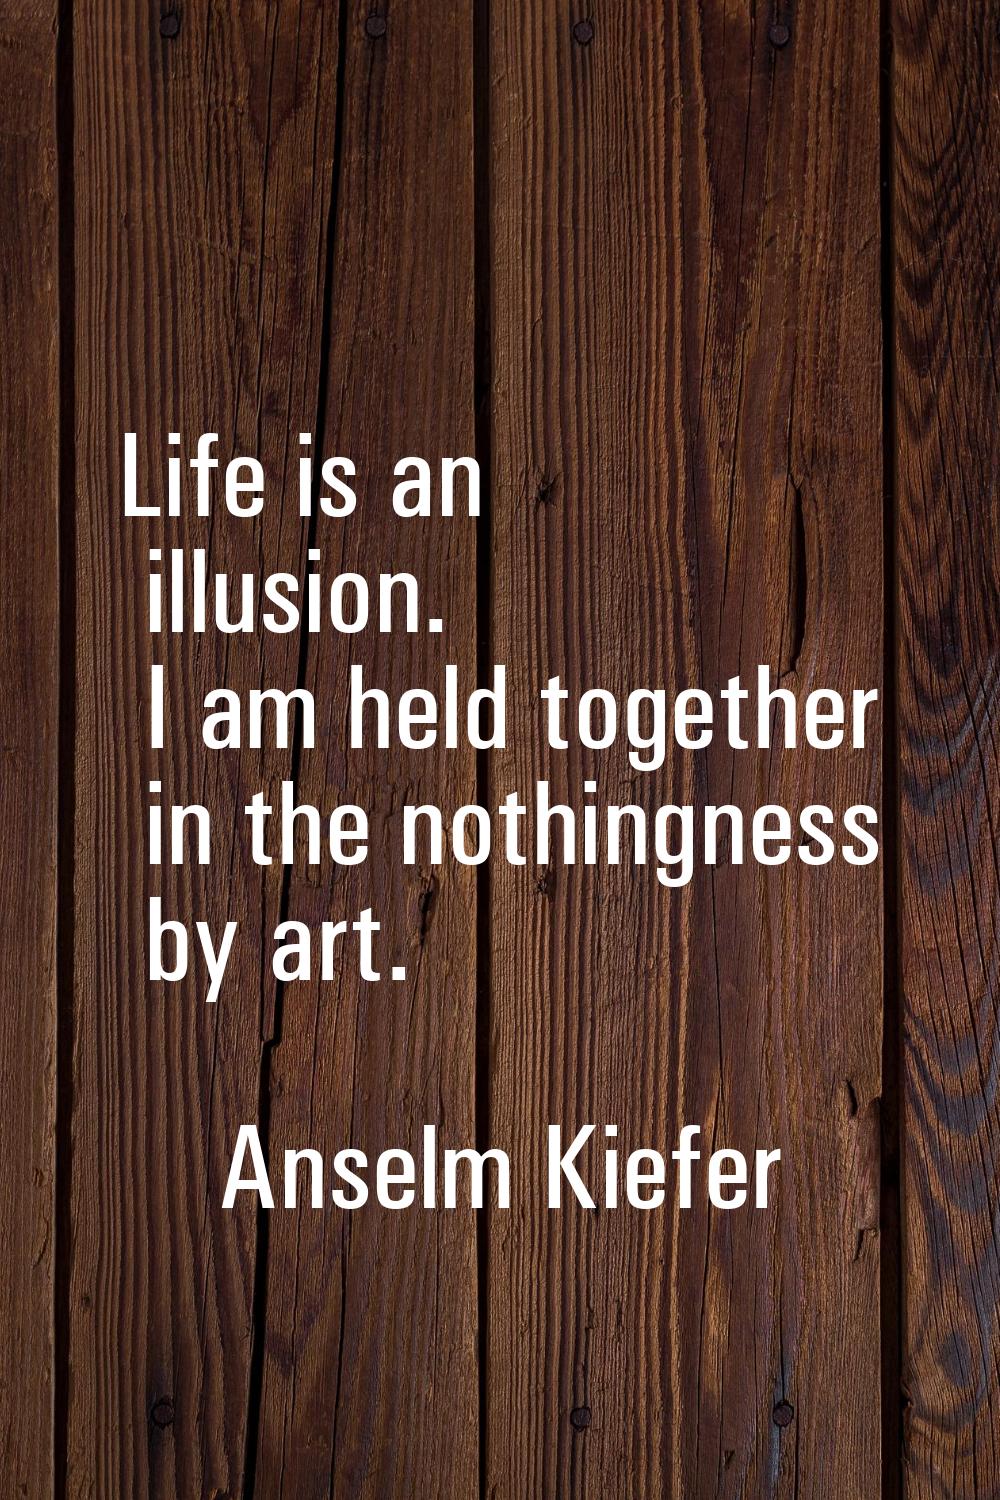 Life is an illusion. I am held together in the nothingness by art.